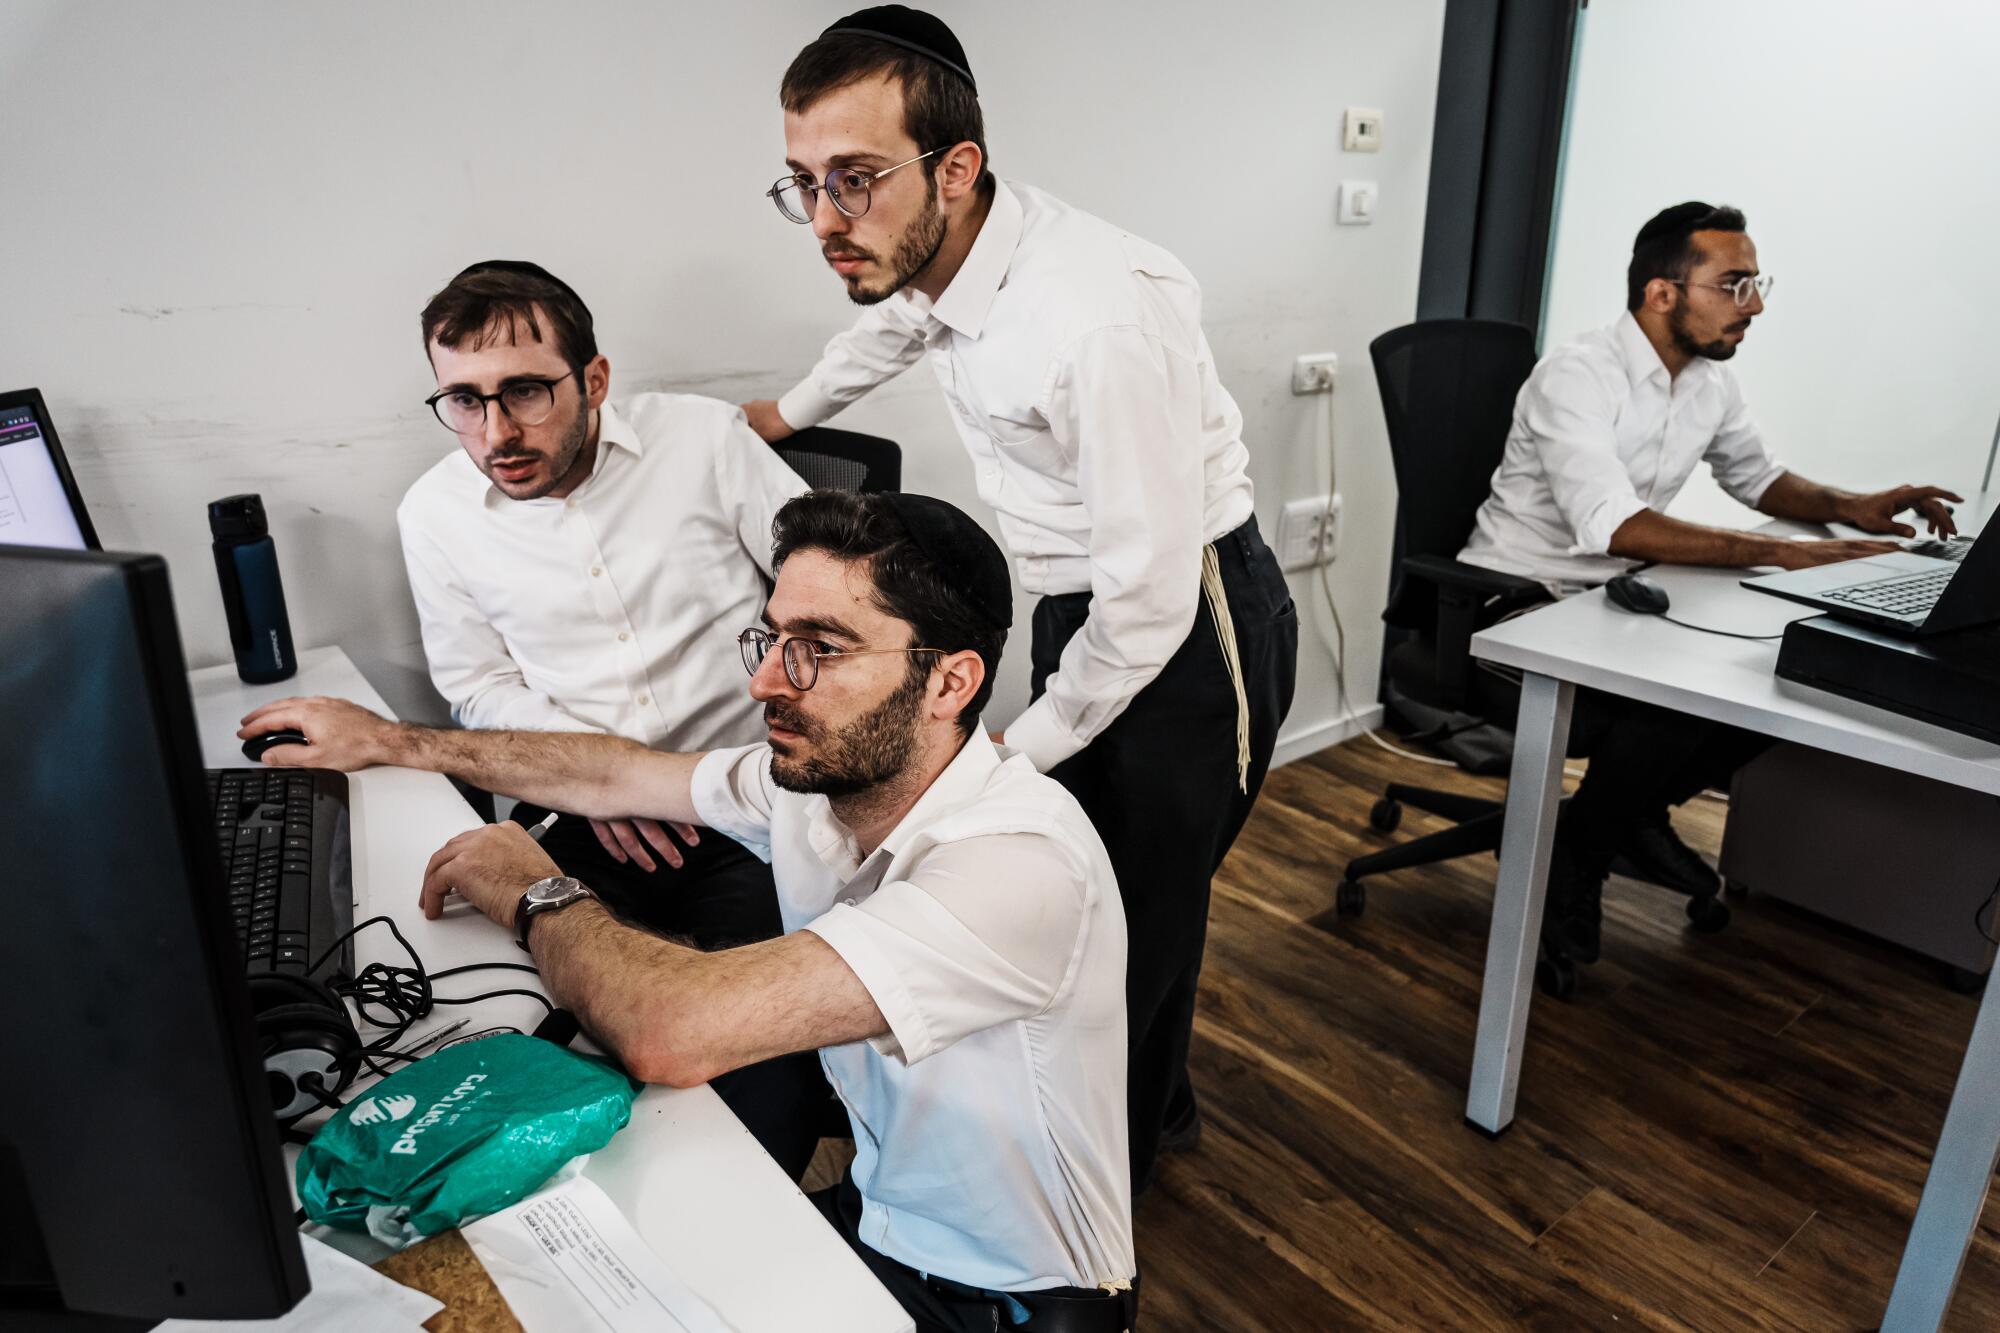  Orthodox Jewish communities to learn how to code and program.